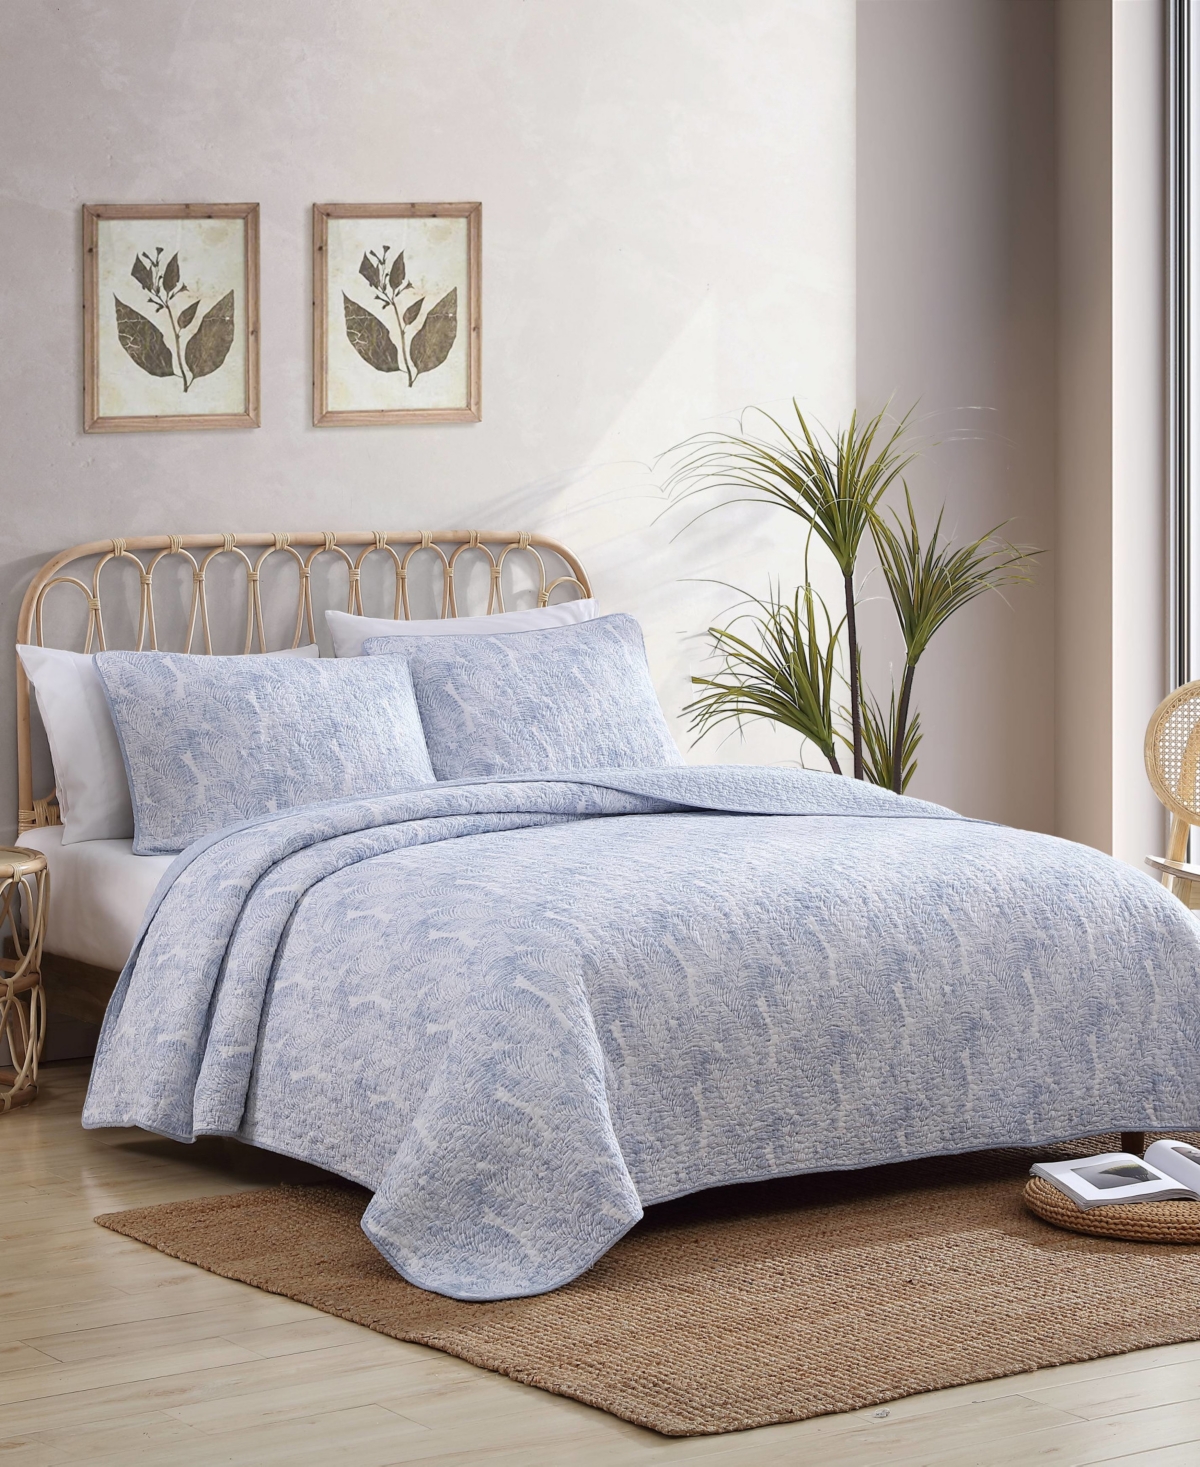 TOMMY BAHAMA HOME TOMMY BAHAMA DISTRESSED WATER LEAVES 2-PC. QUILT SET, TWIN BEDDING